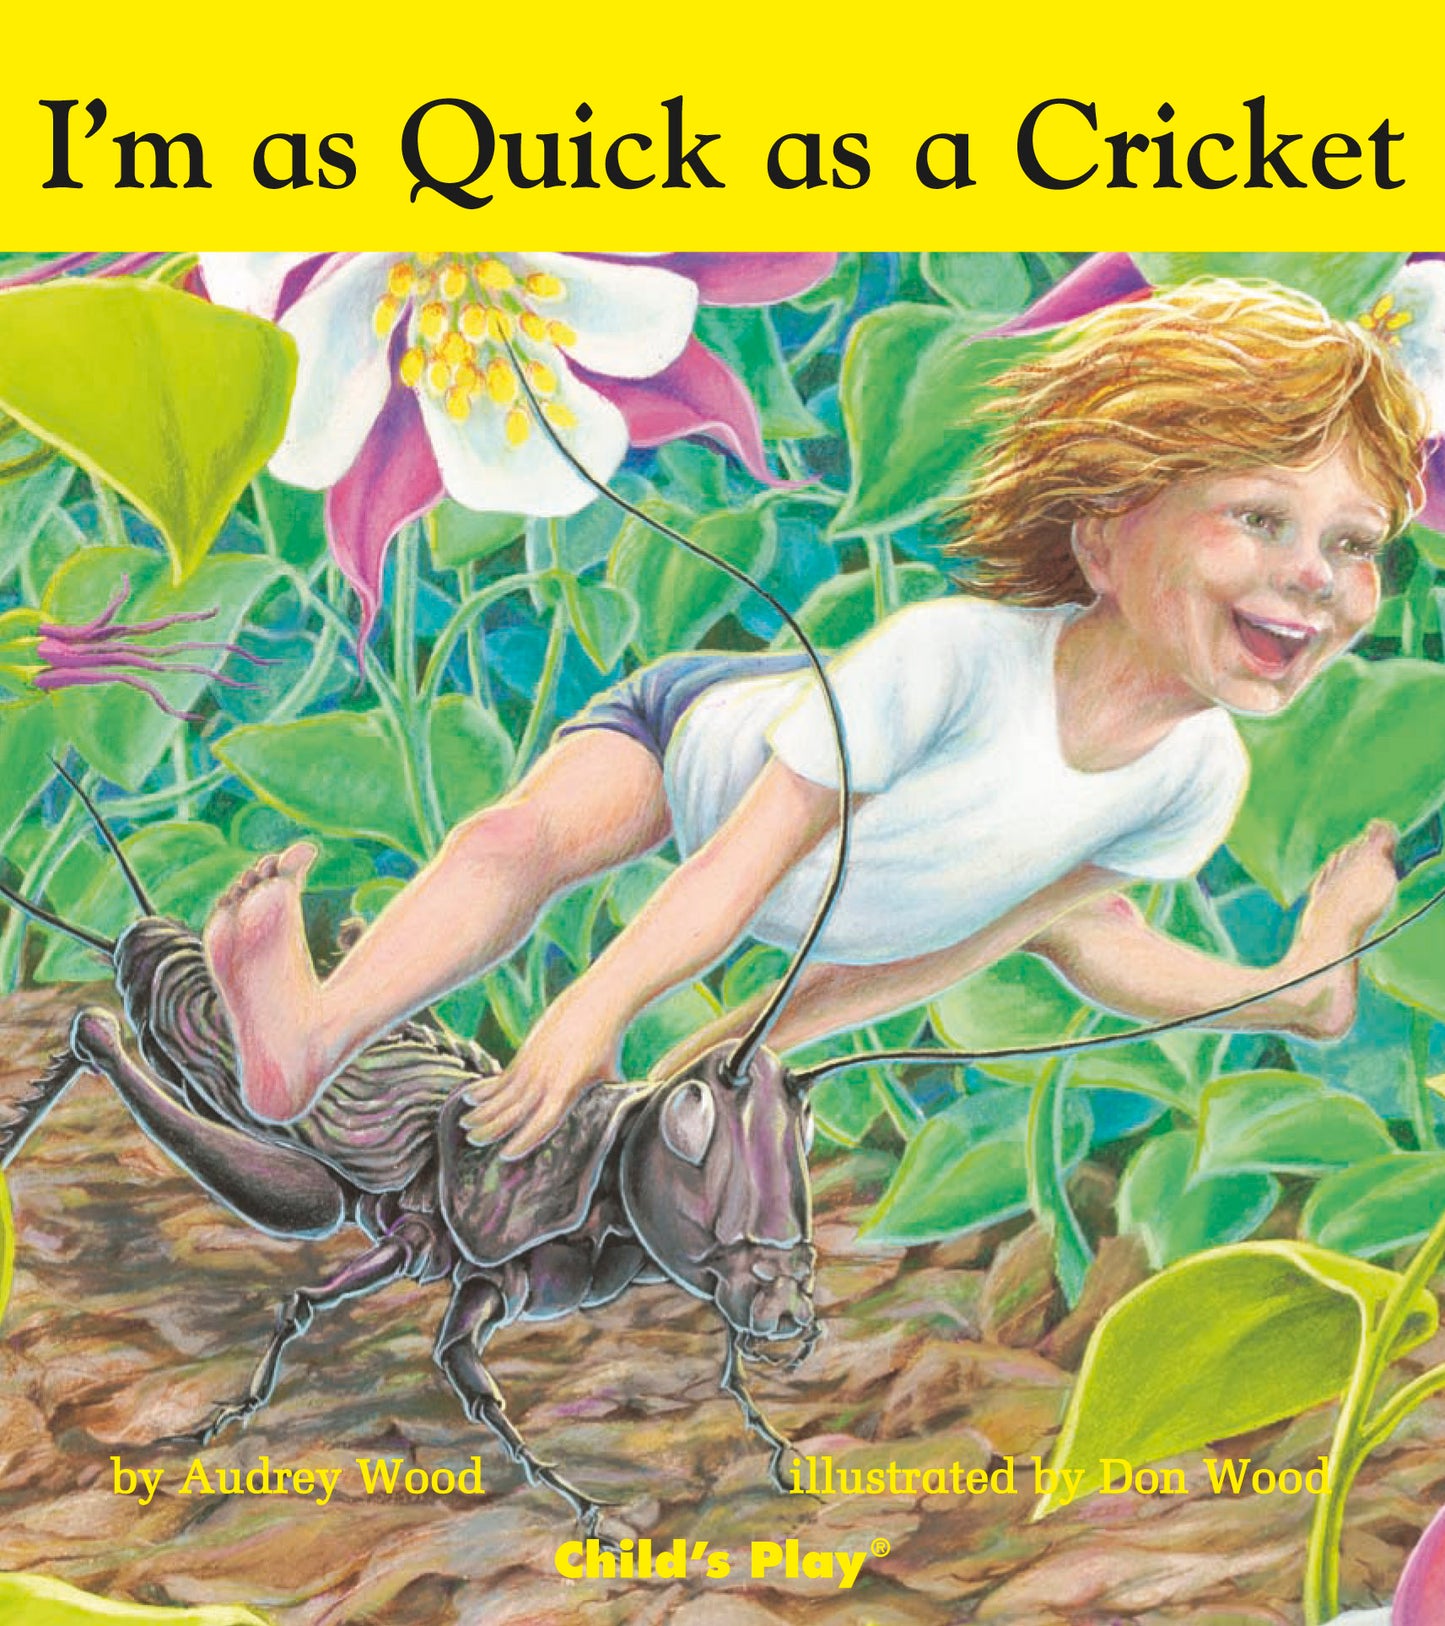 I'm as Quick as a Cricket (Board Book Edition)